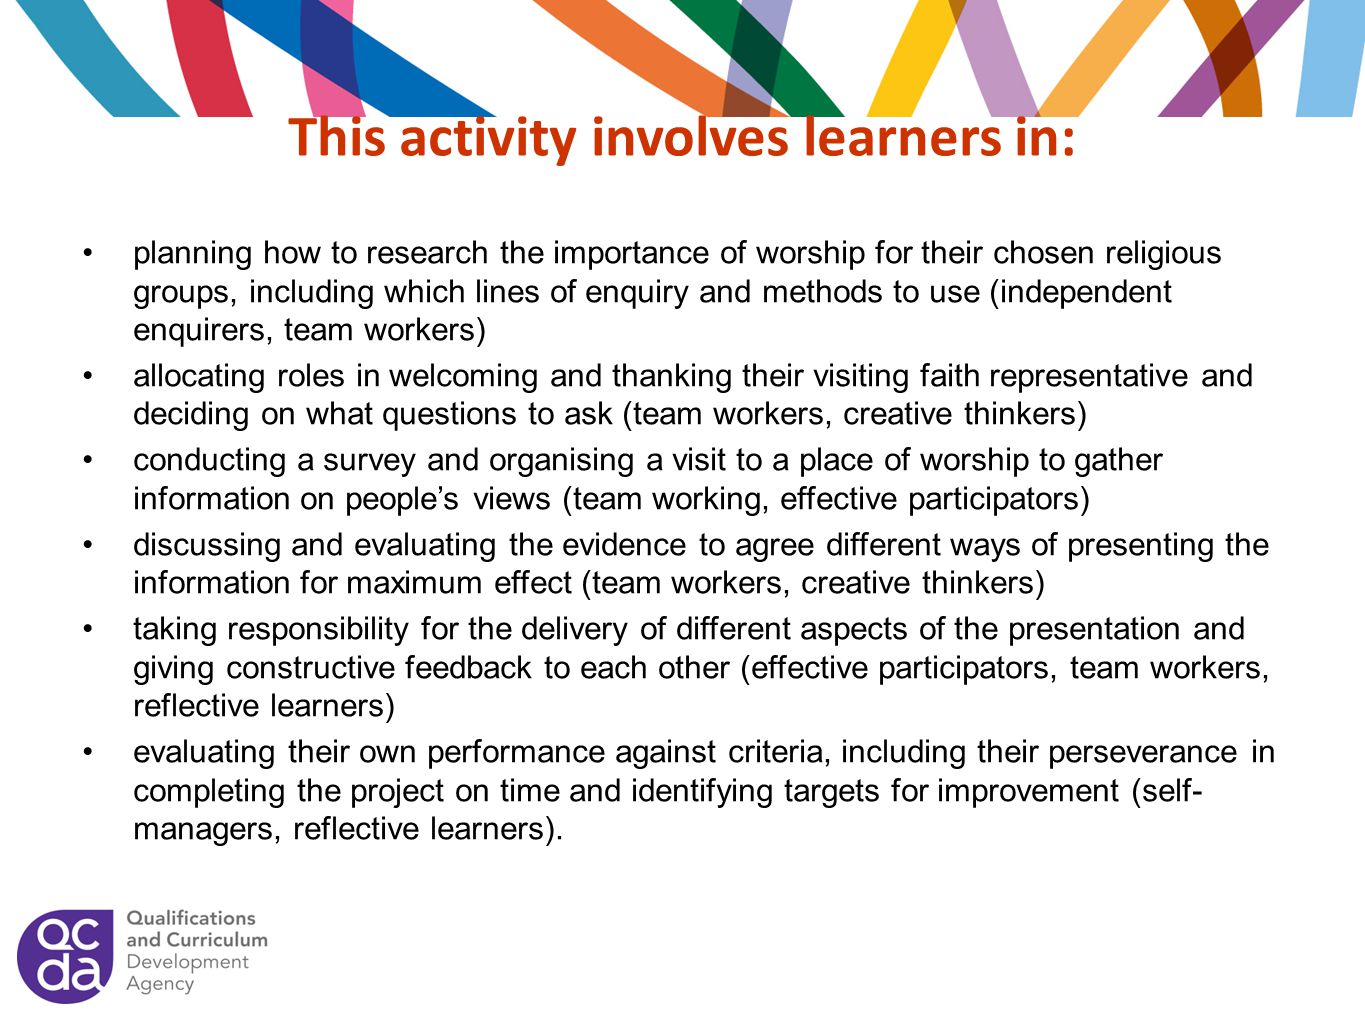 This activity involves learners in: